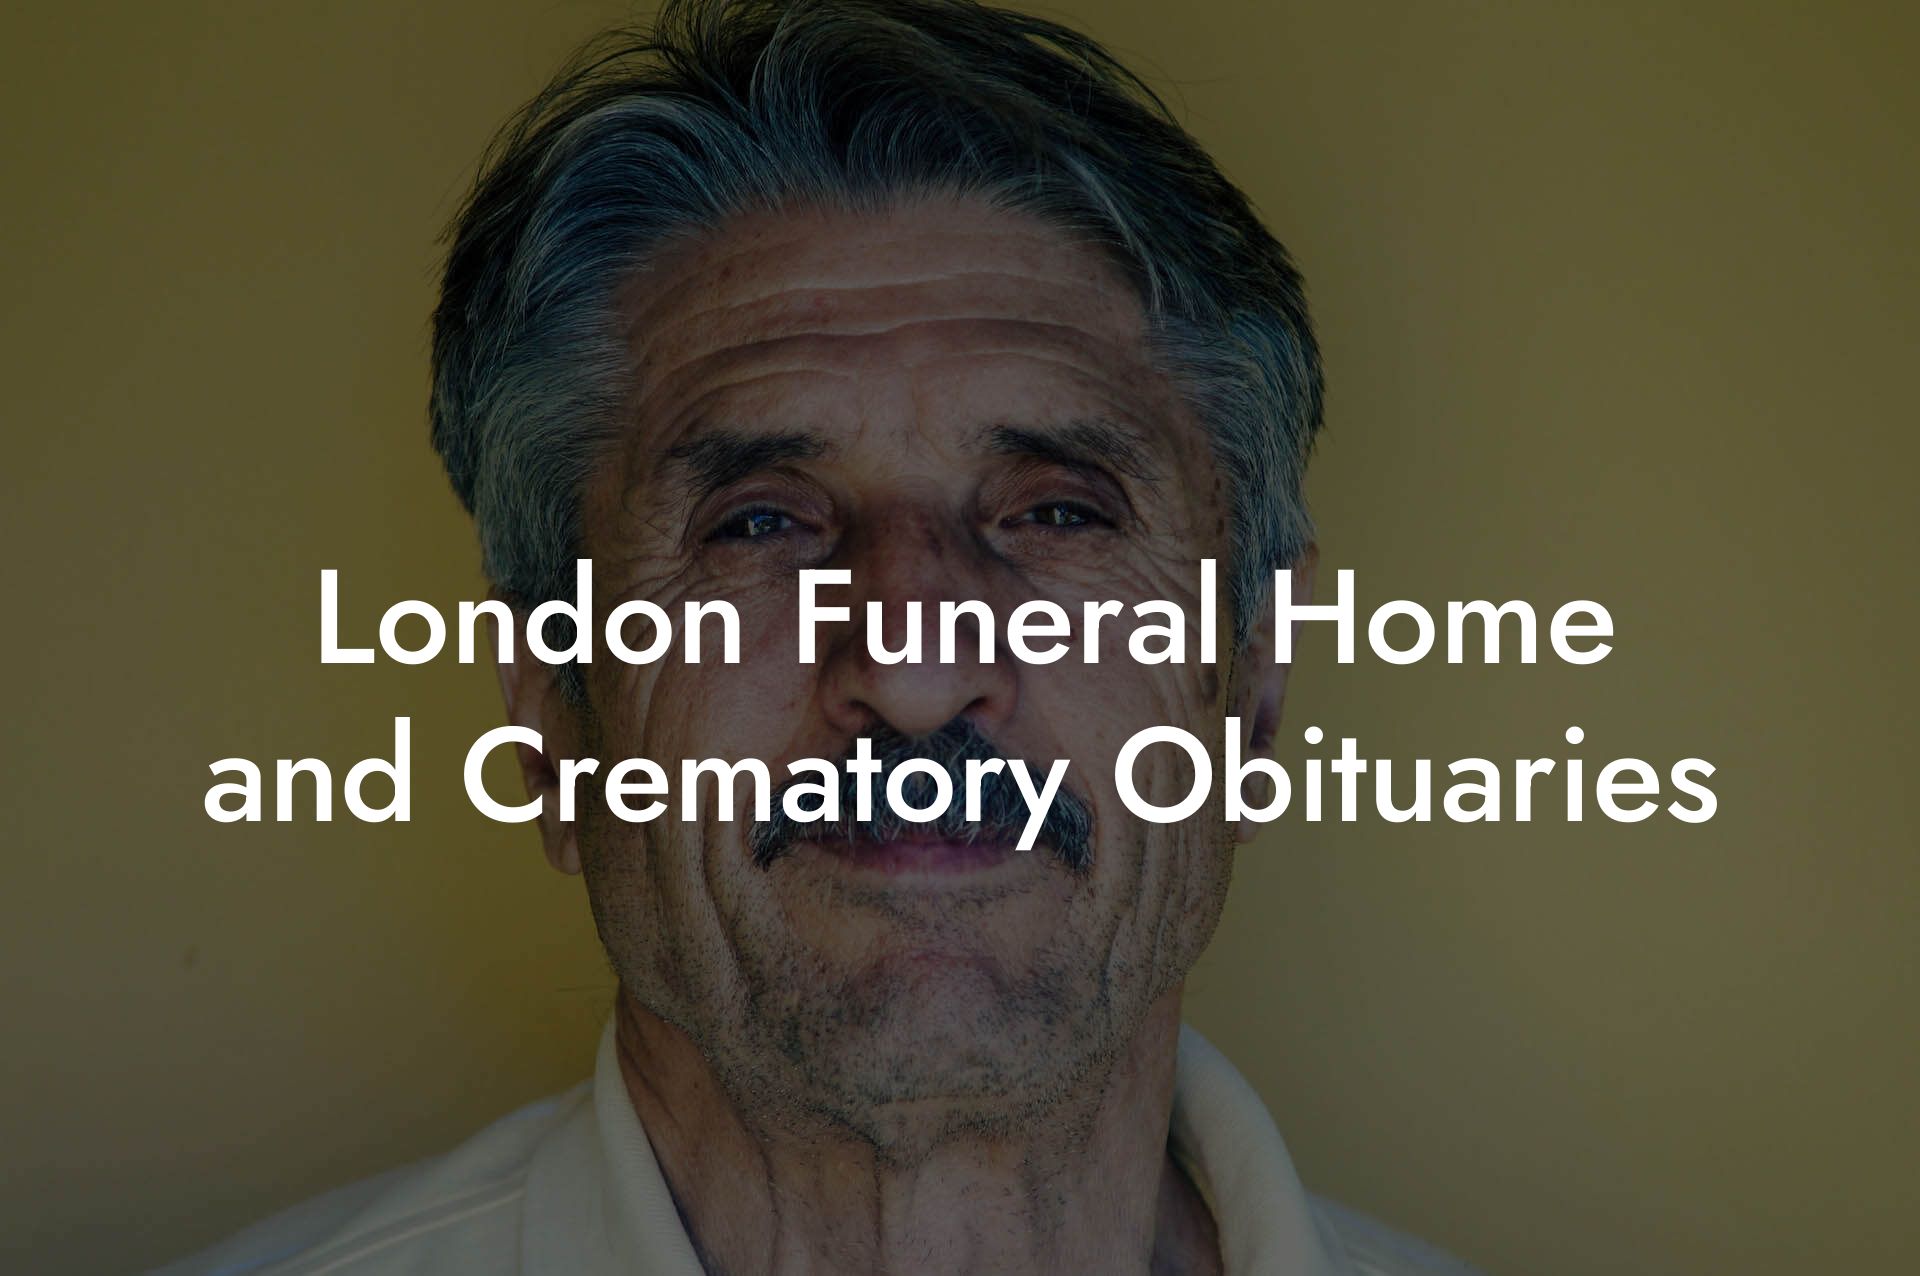 London Funeral Home and Crematory Obituaries